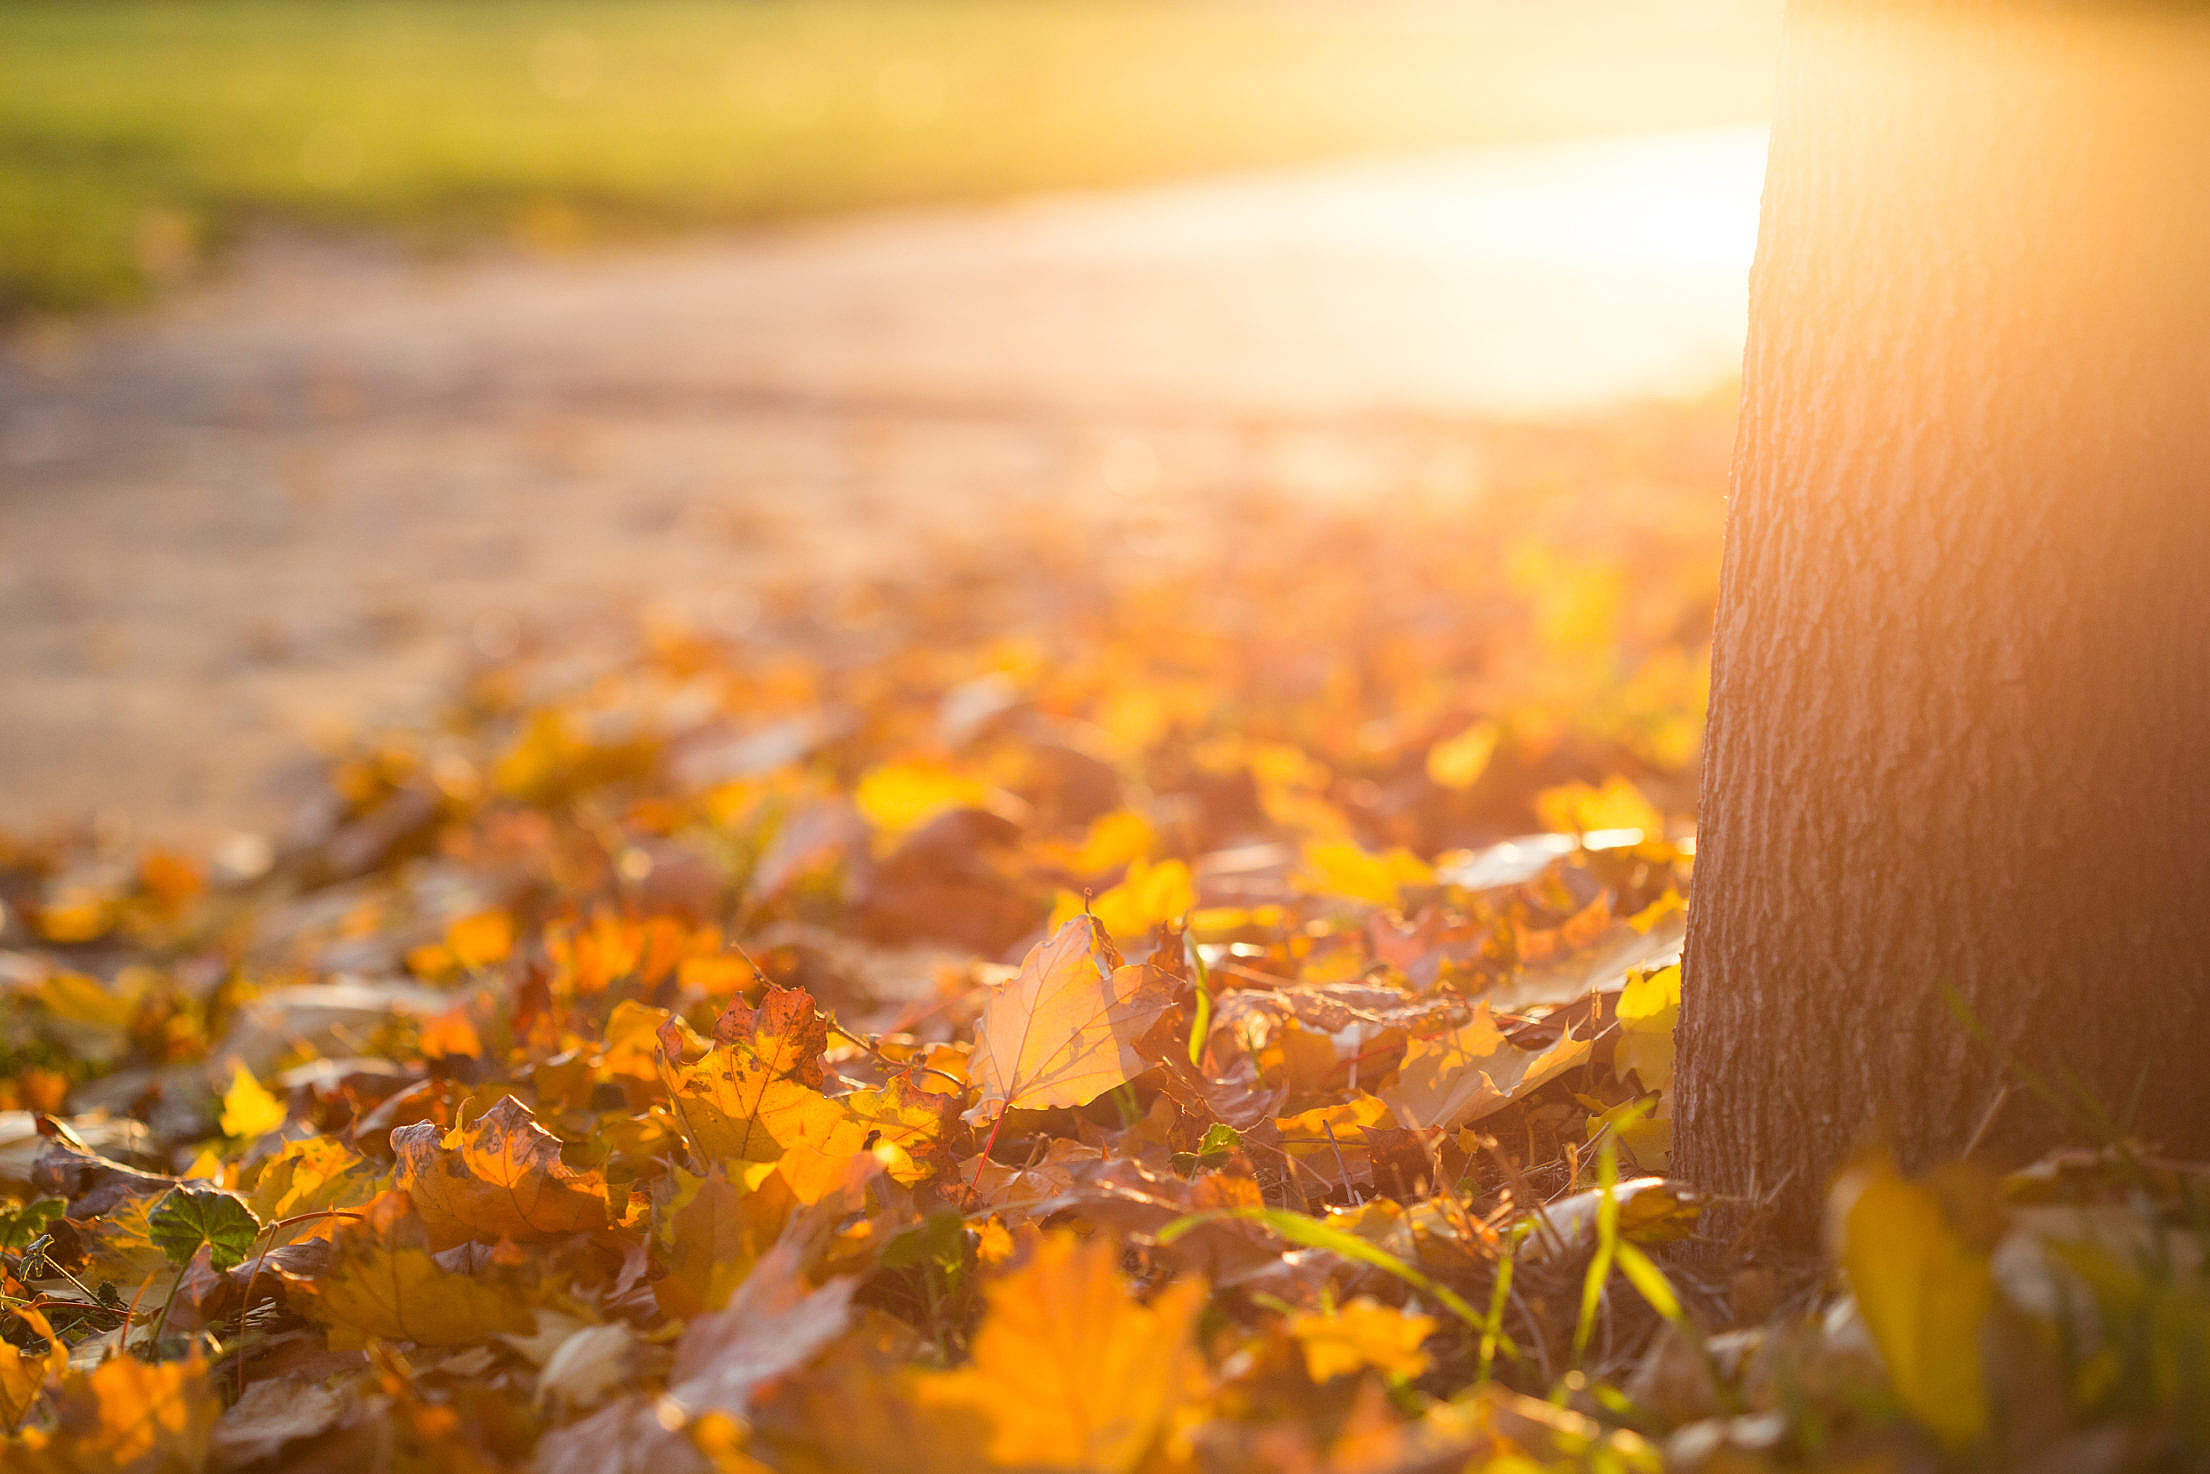 Fall Autumn Leaves on the Ground Free Stock Photo Download | picjumbo